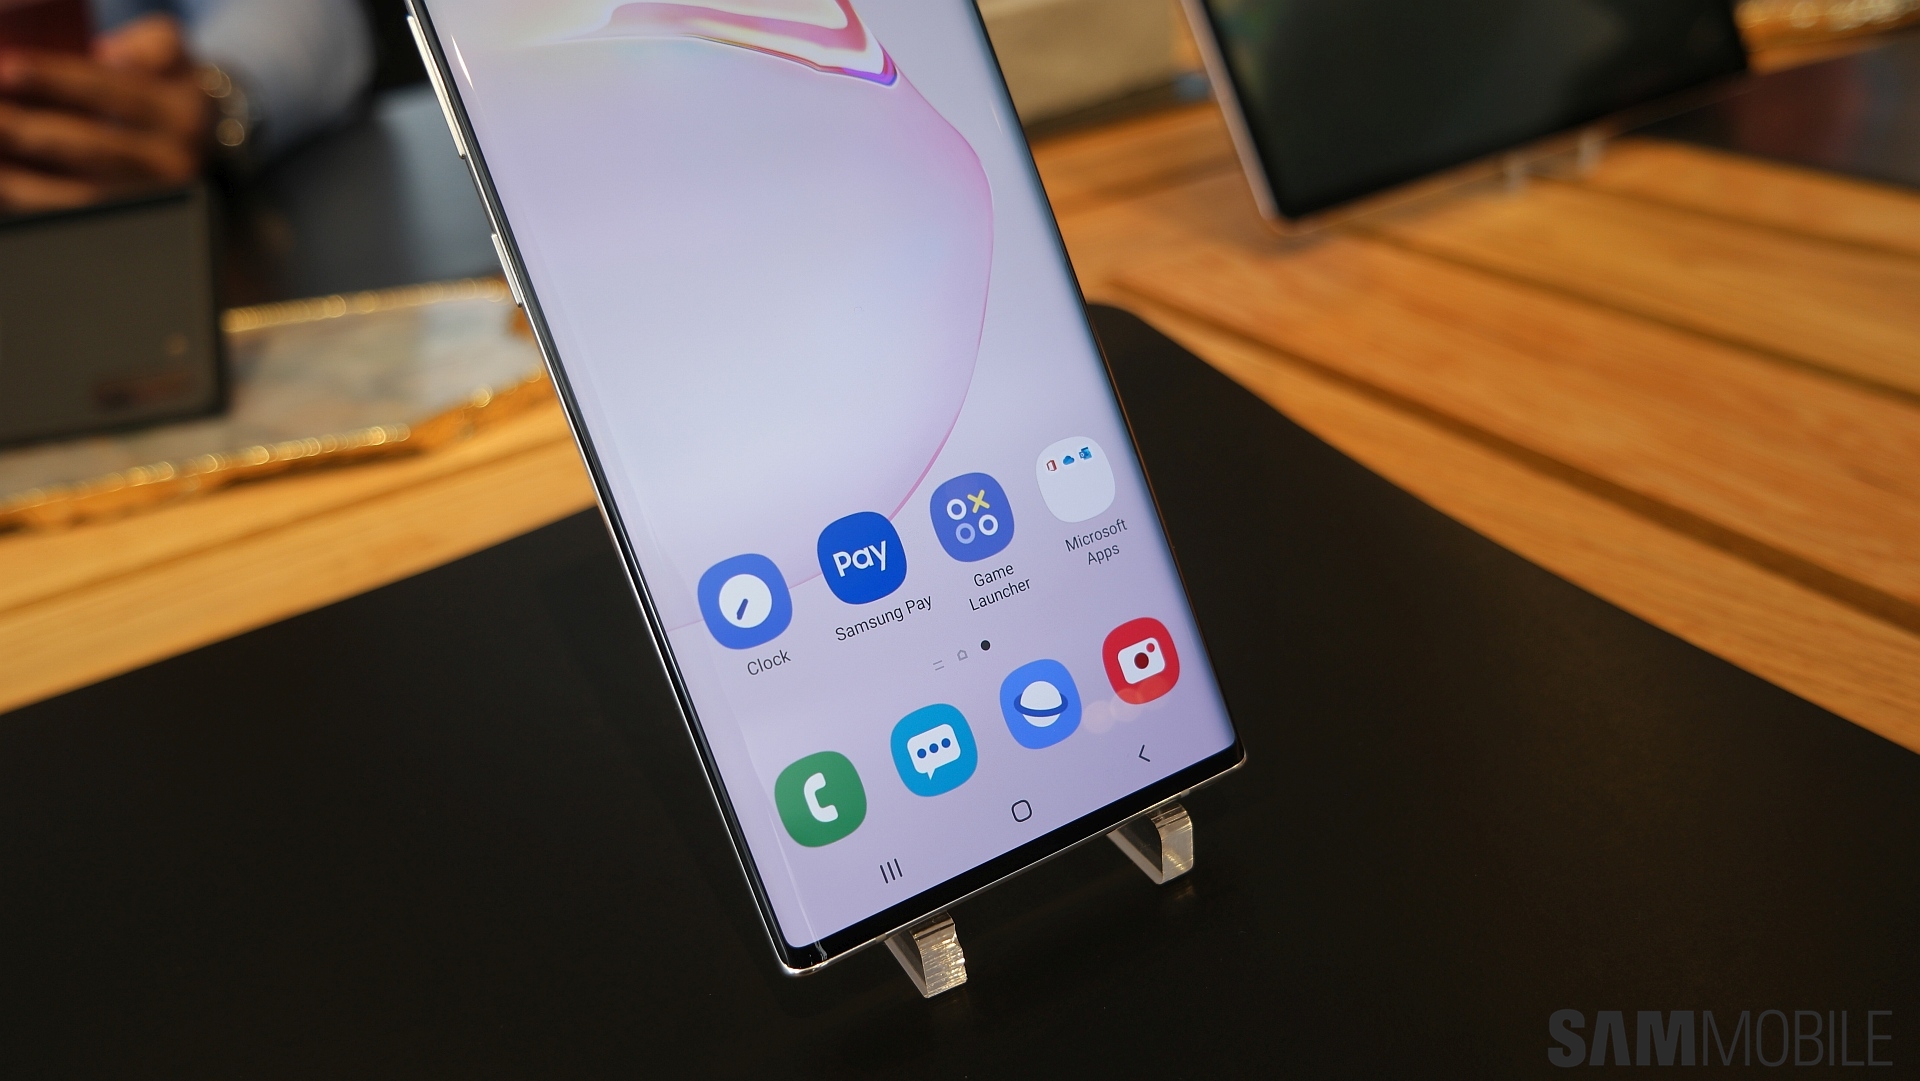 Samsung Galaxy Note 10 Plus - Full Specification, price, review